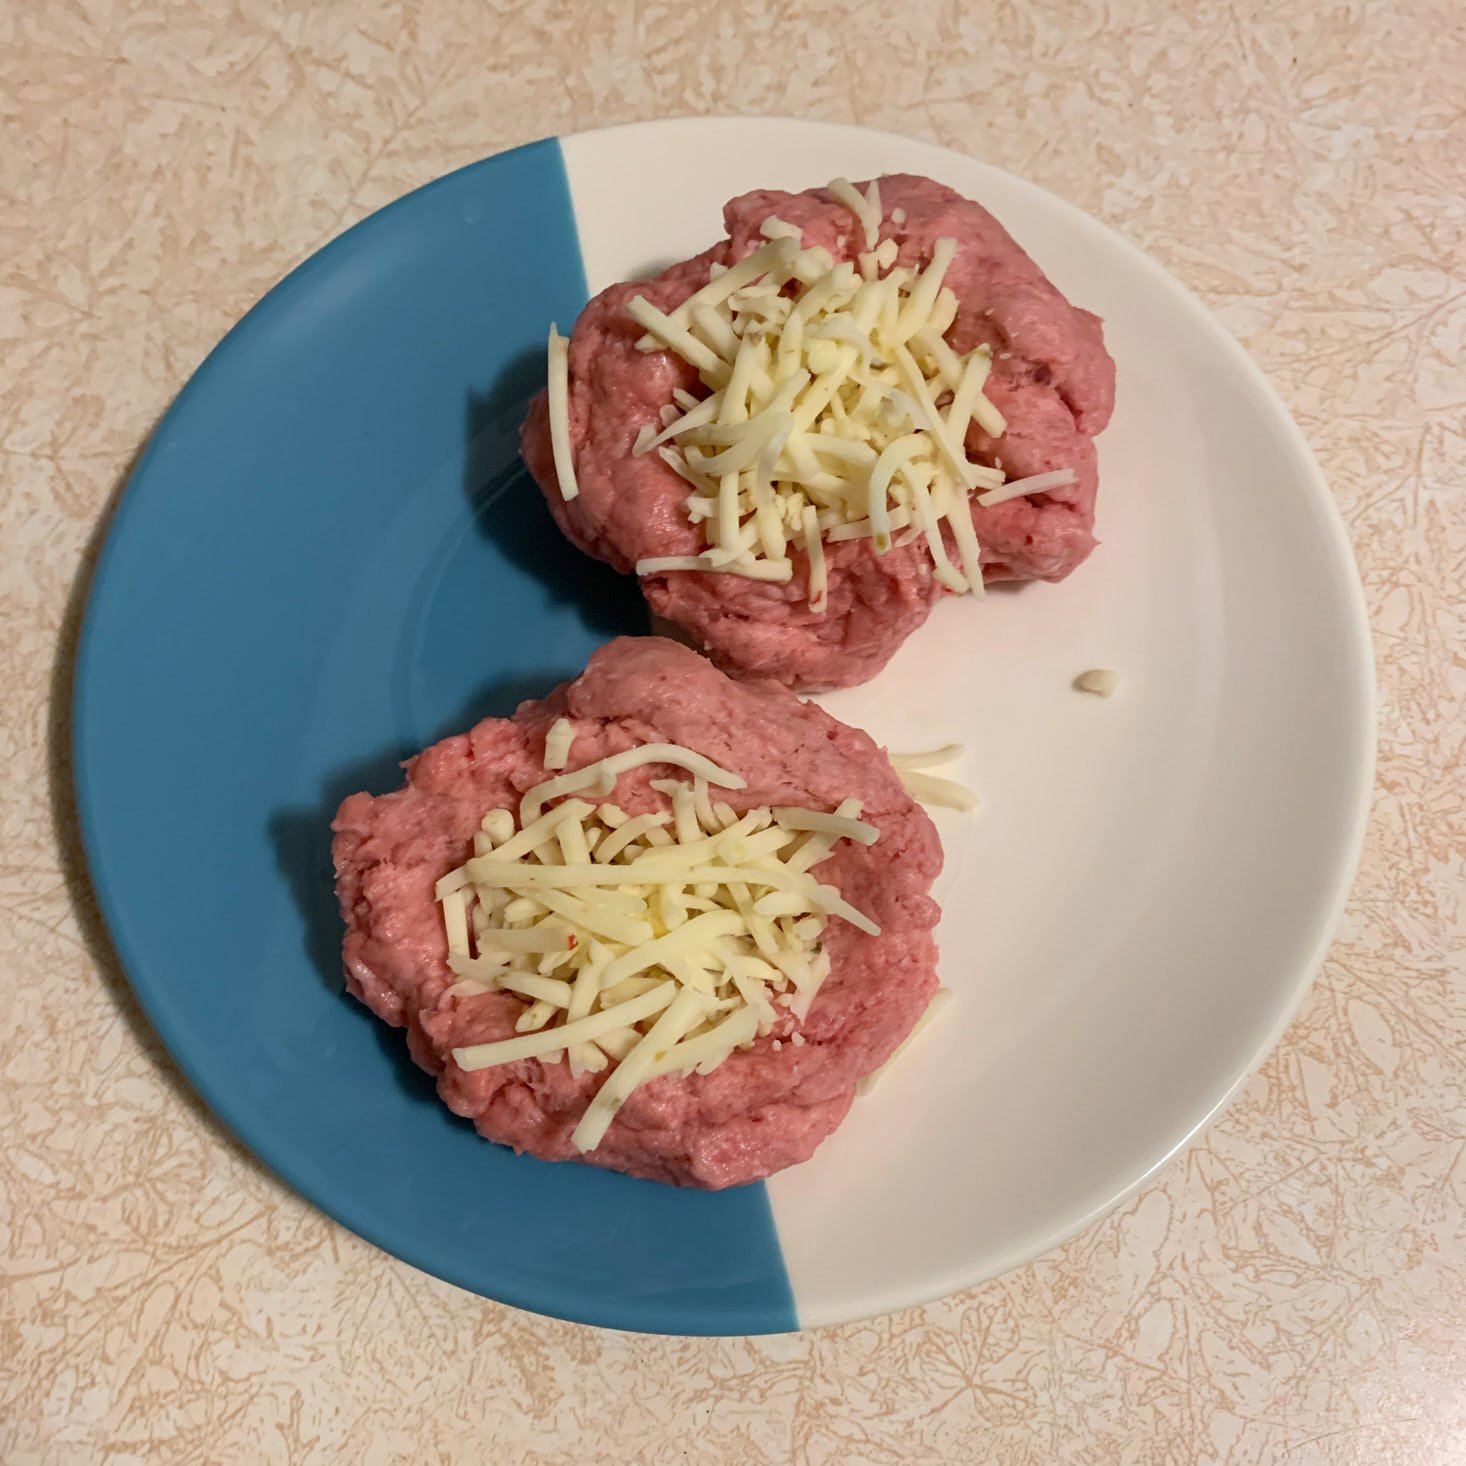 raw pork burgers with cheese about to be stuffed in on plate